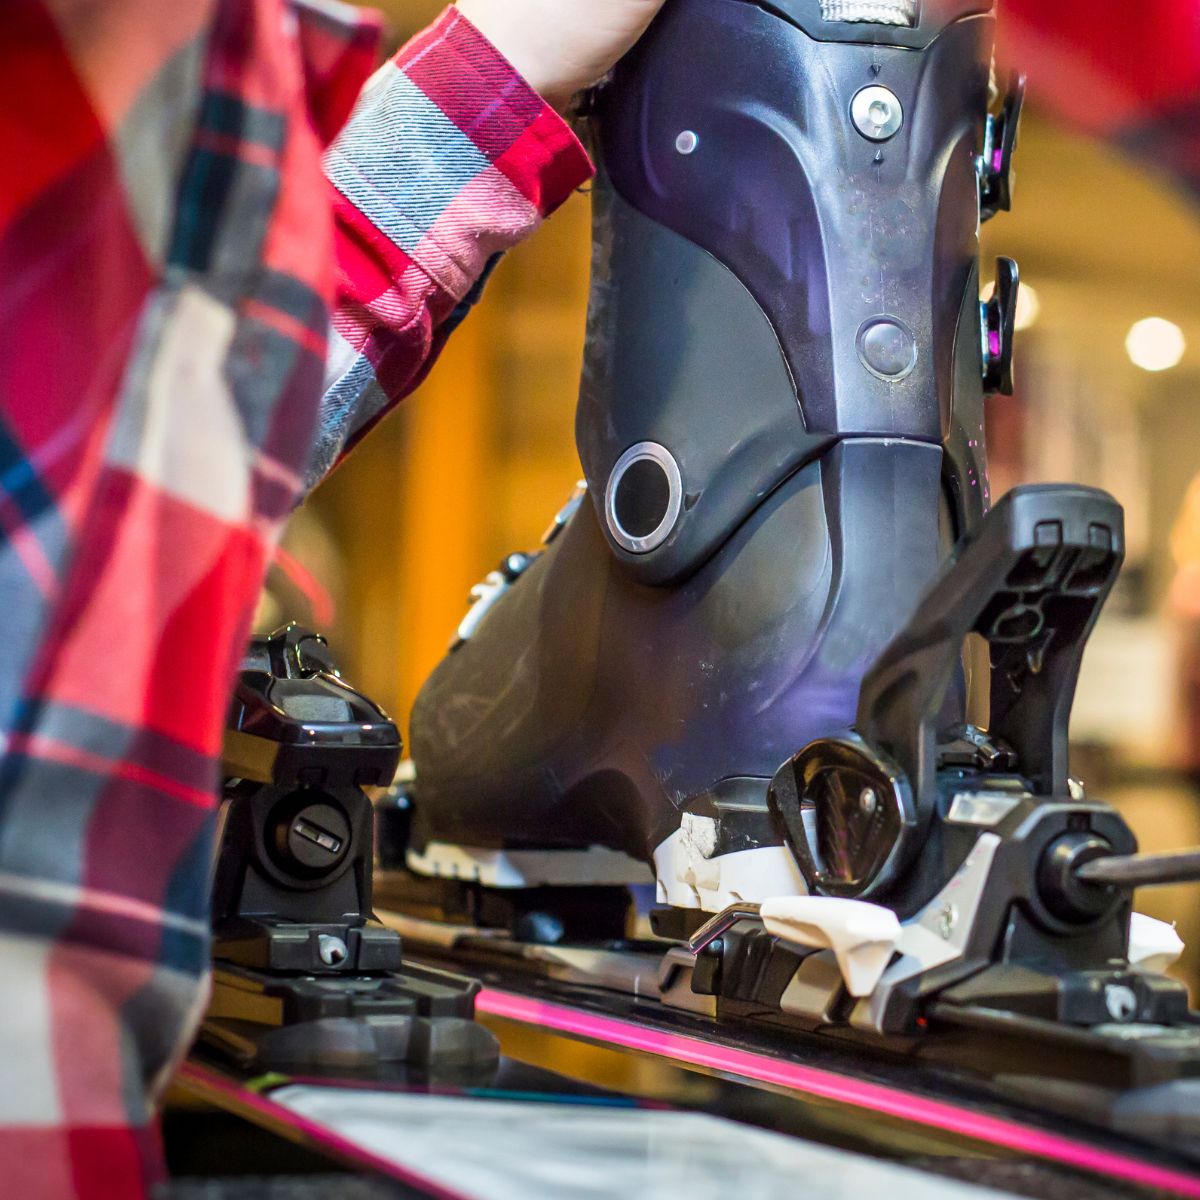 Personalized precision awaits with our Binding Adjustment service at Switchback Sports. Our expert technicians ensure that your ski or snowboard bindings are meticulously set up to match your unique specifications and boot requirements.